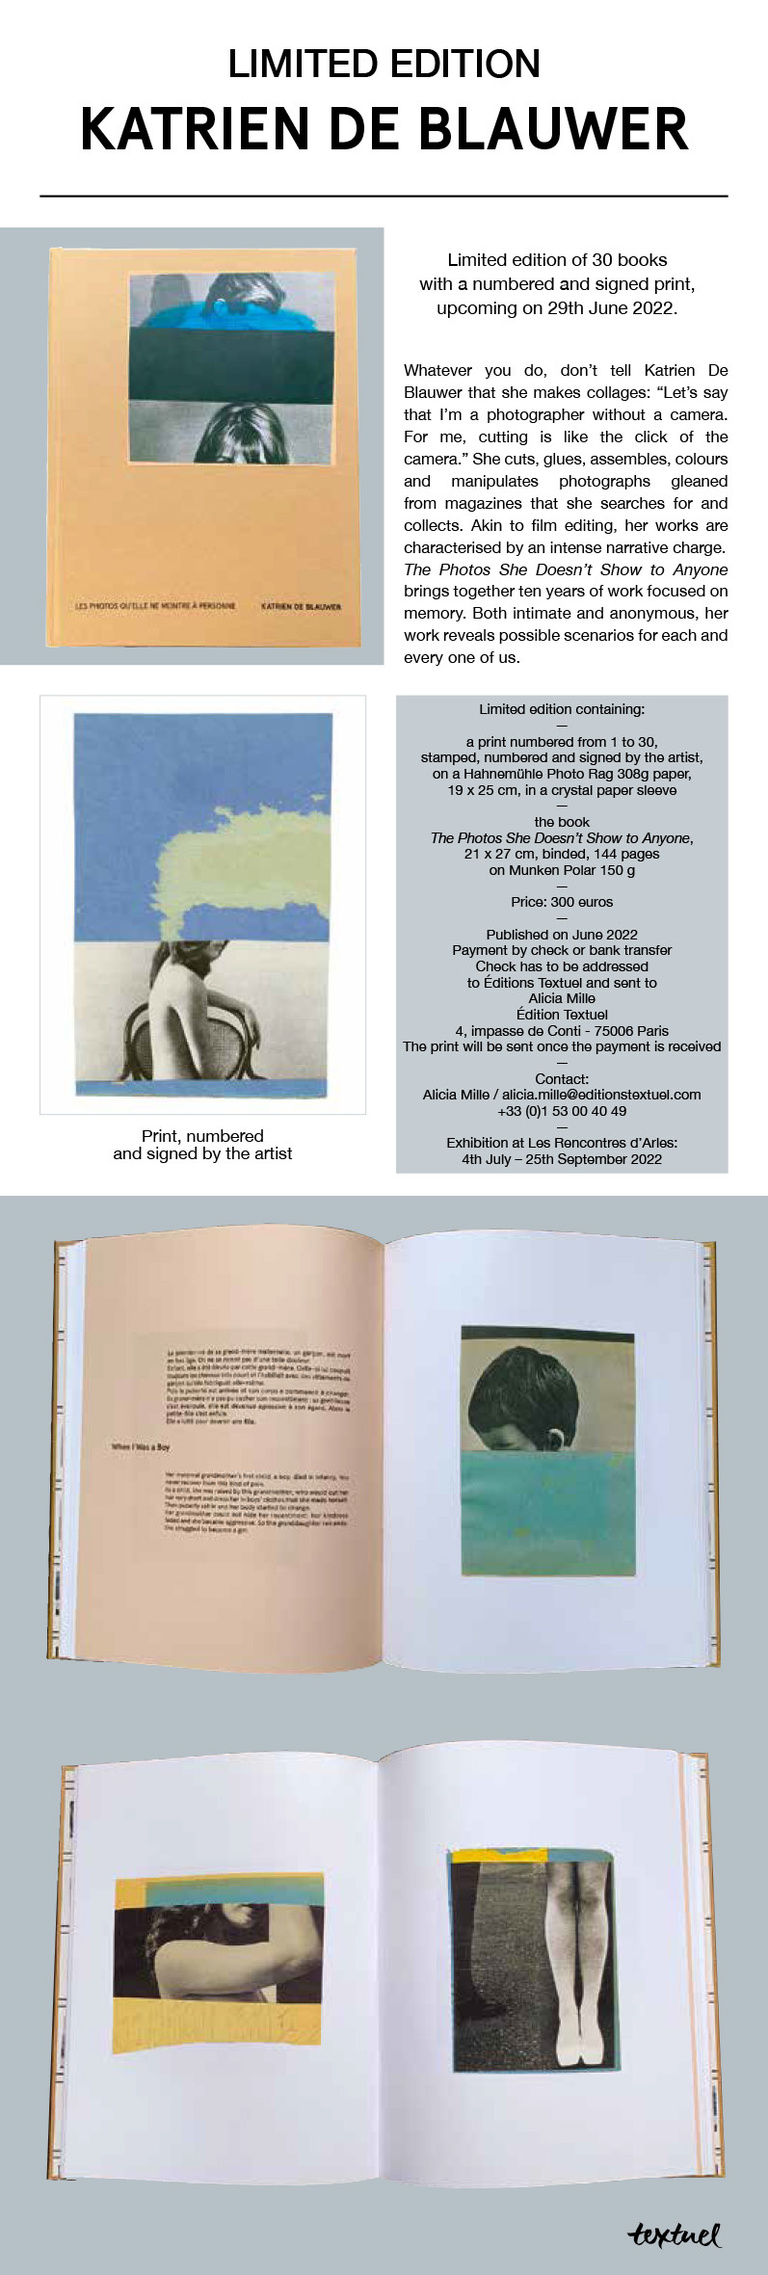 Editions Textuel -  THE PHOTOS SHE DOESN’T SHOW TO ANYONE - LIMITED EDITION WITH PRINT